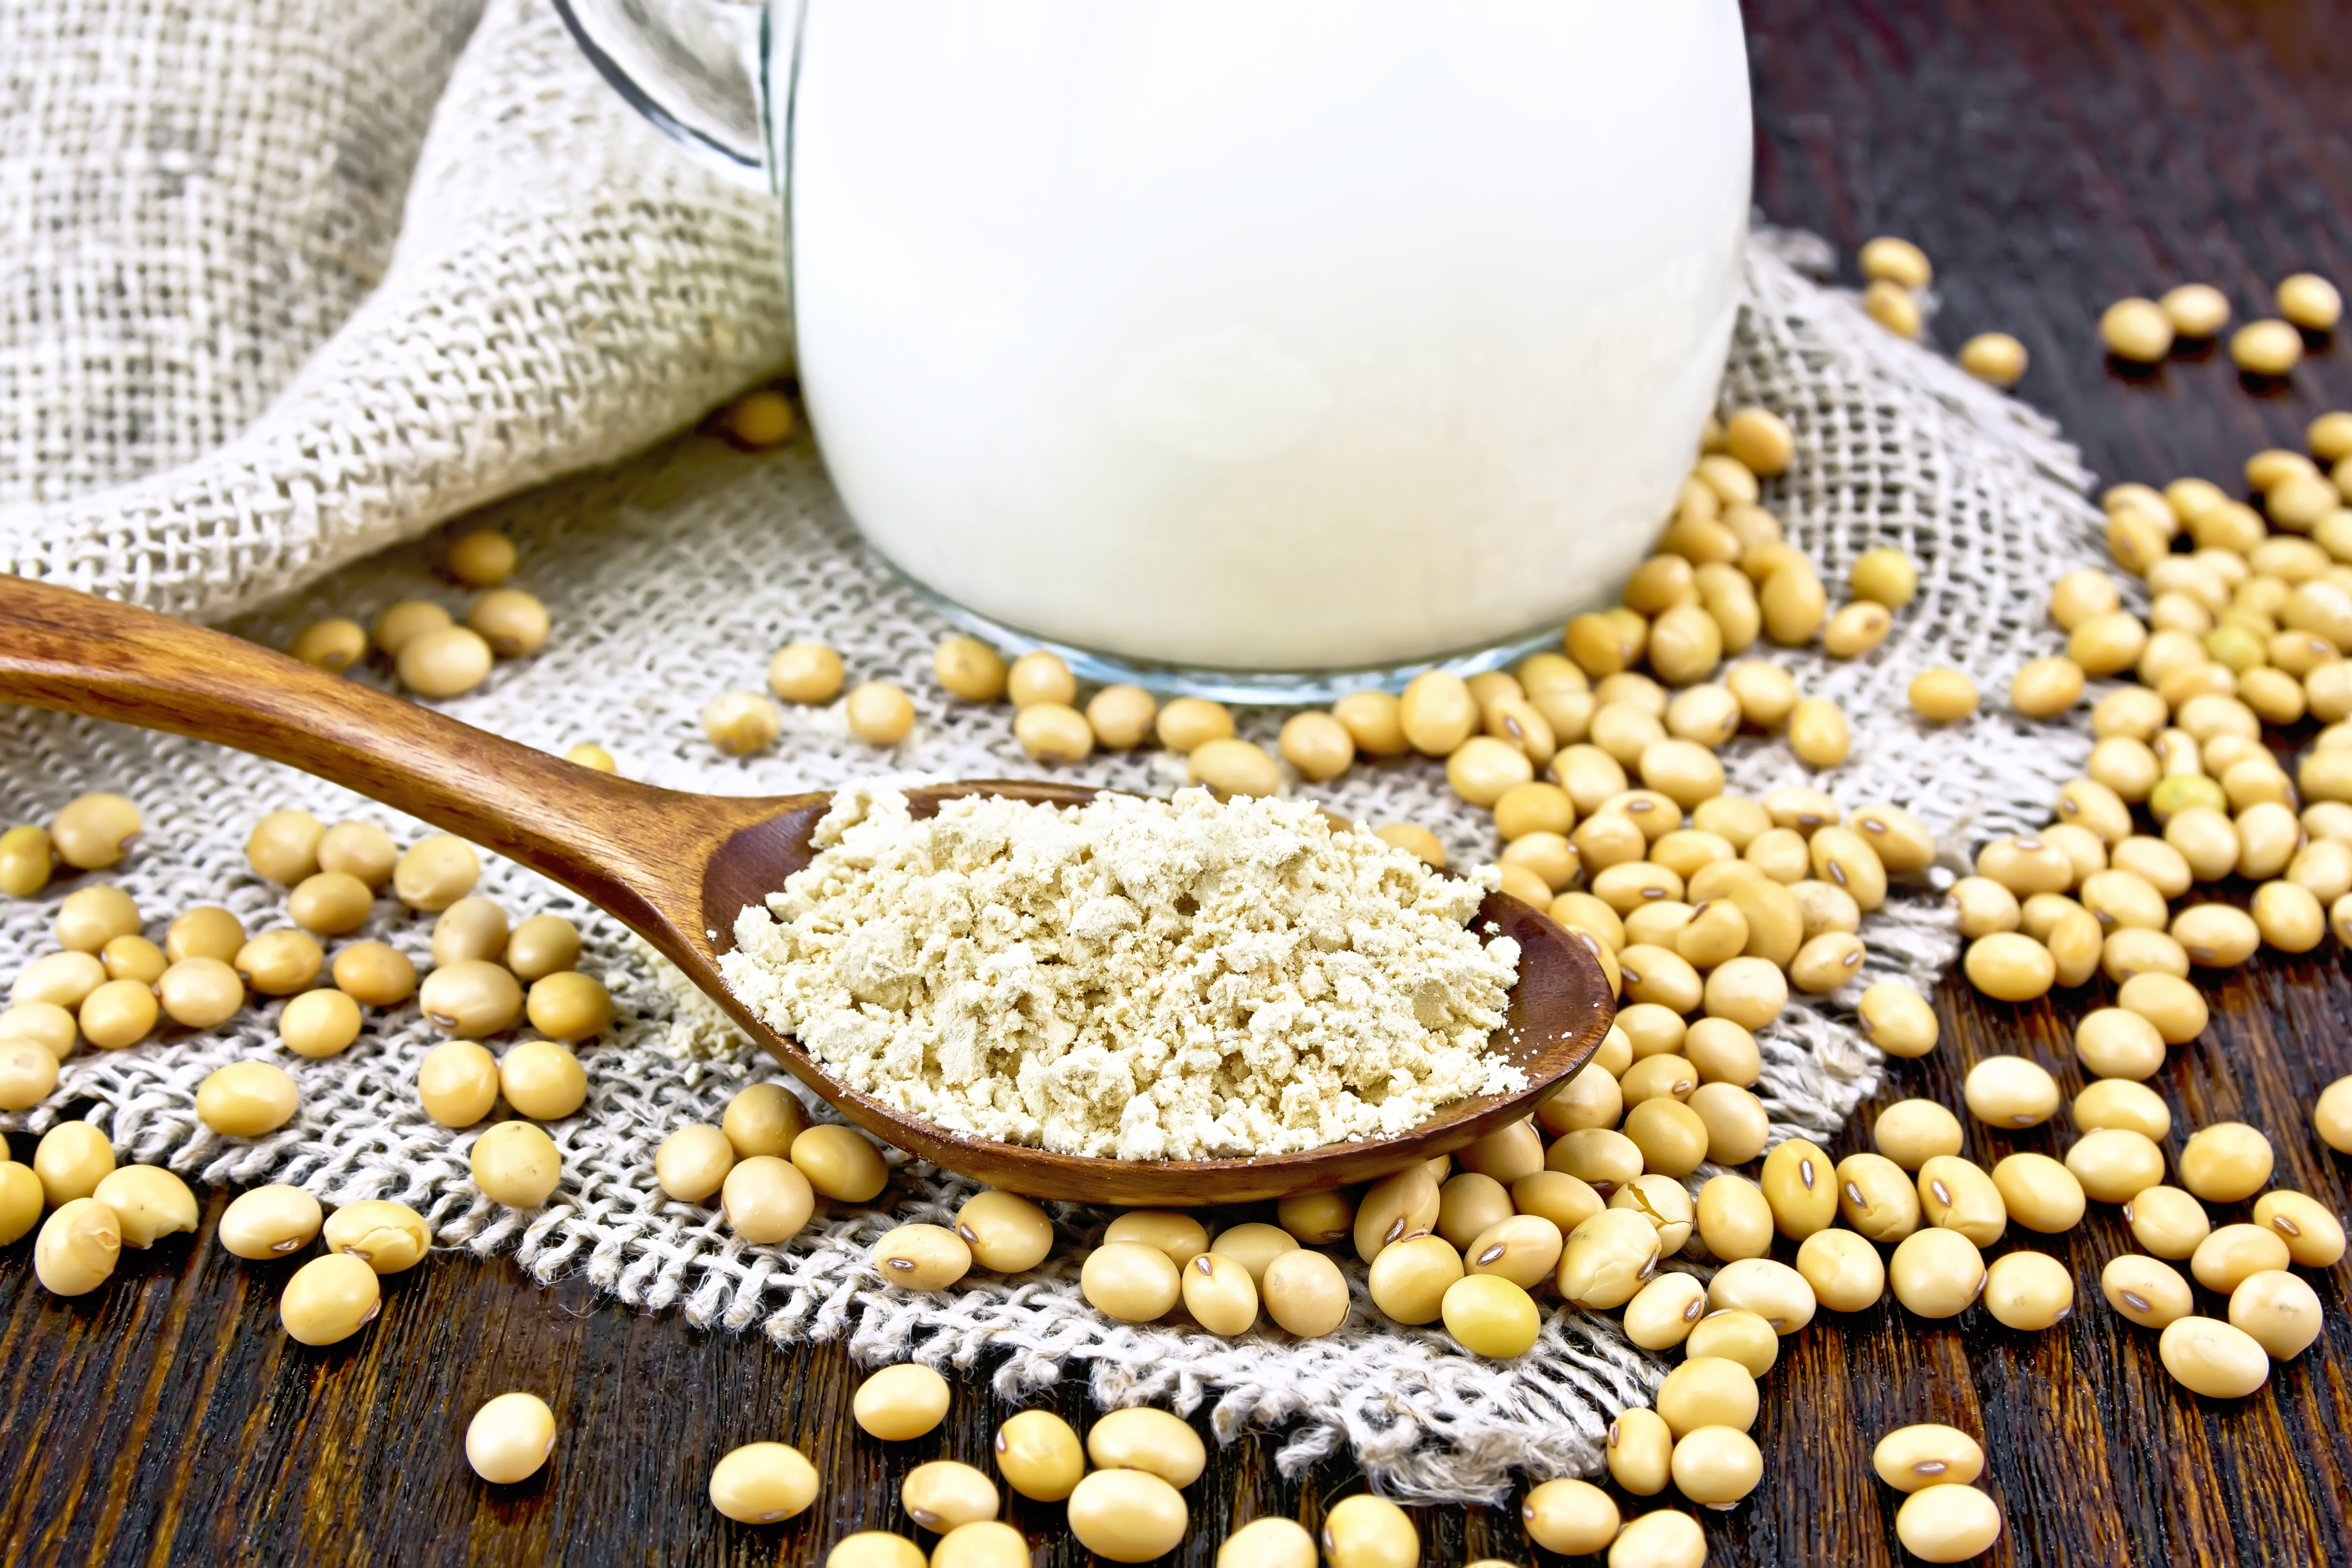 Soy is a high quality plant protein